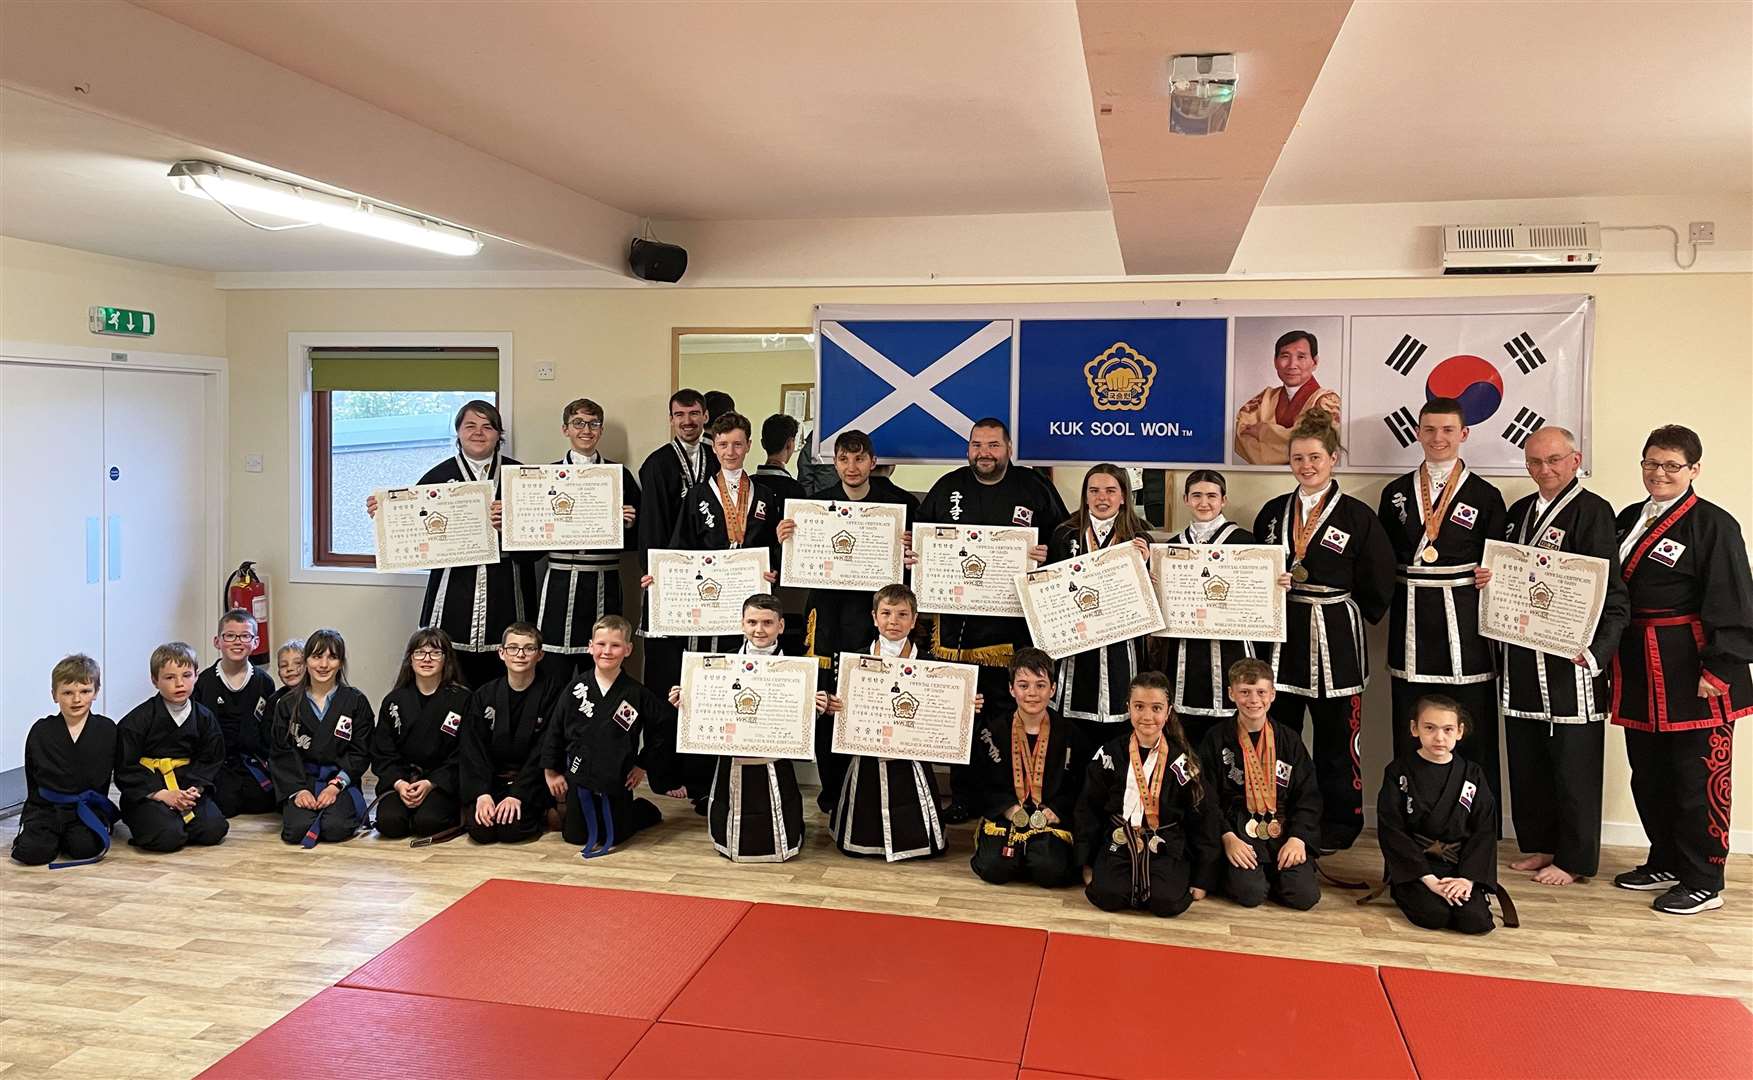 Students from Kuk Sool Won of Caithness at the event in Bathgate.